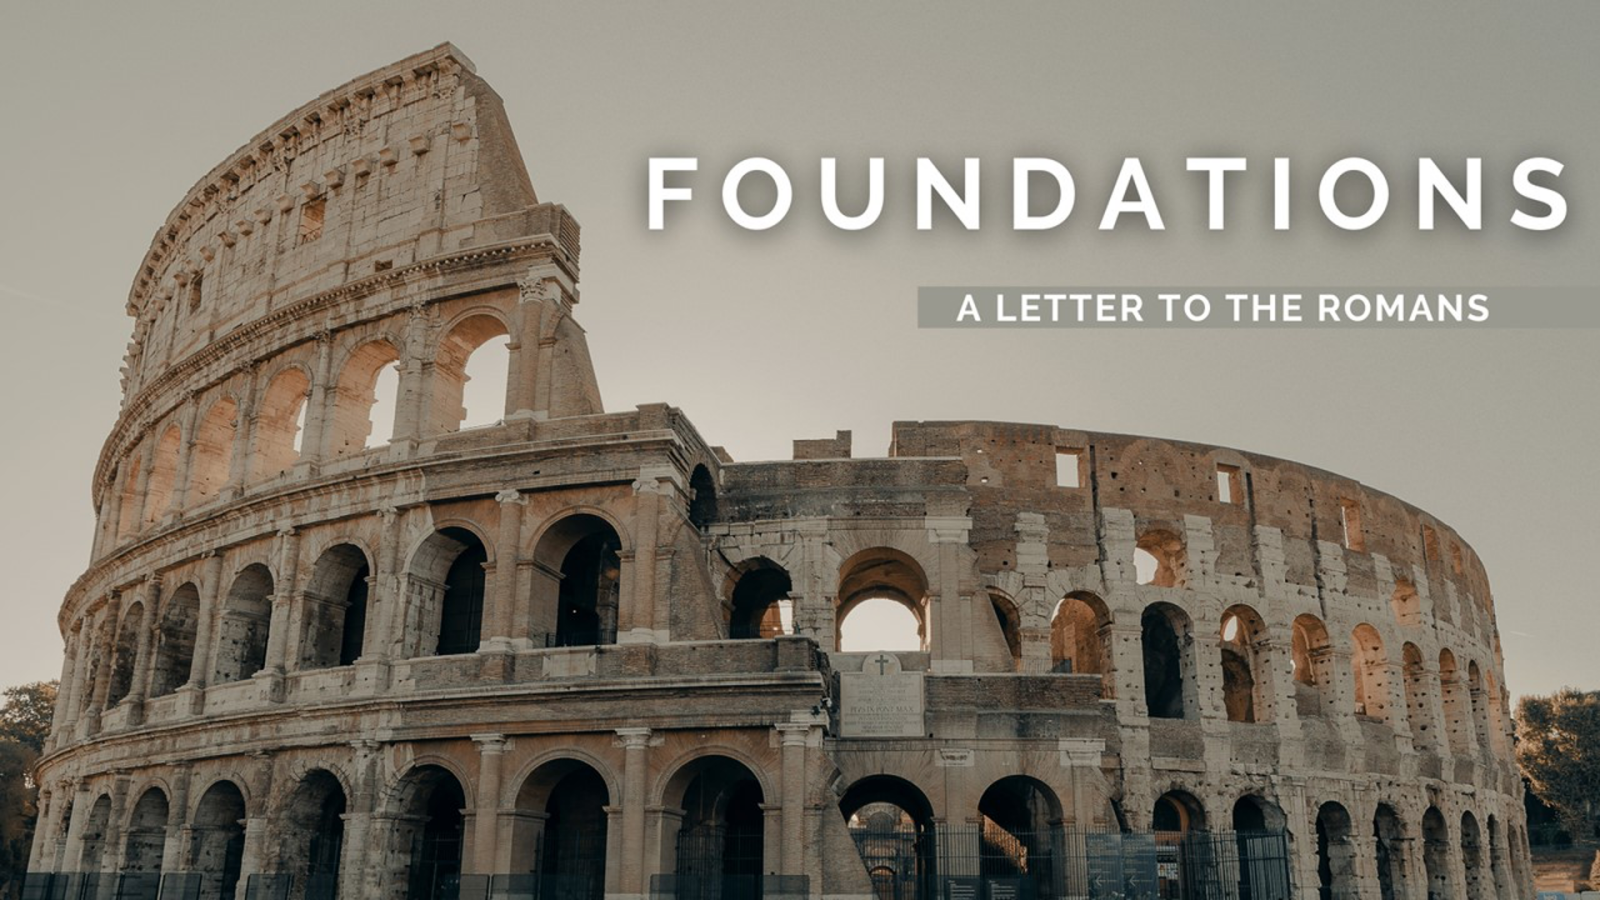 Foundations - A Letter to the Romans